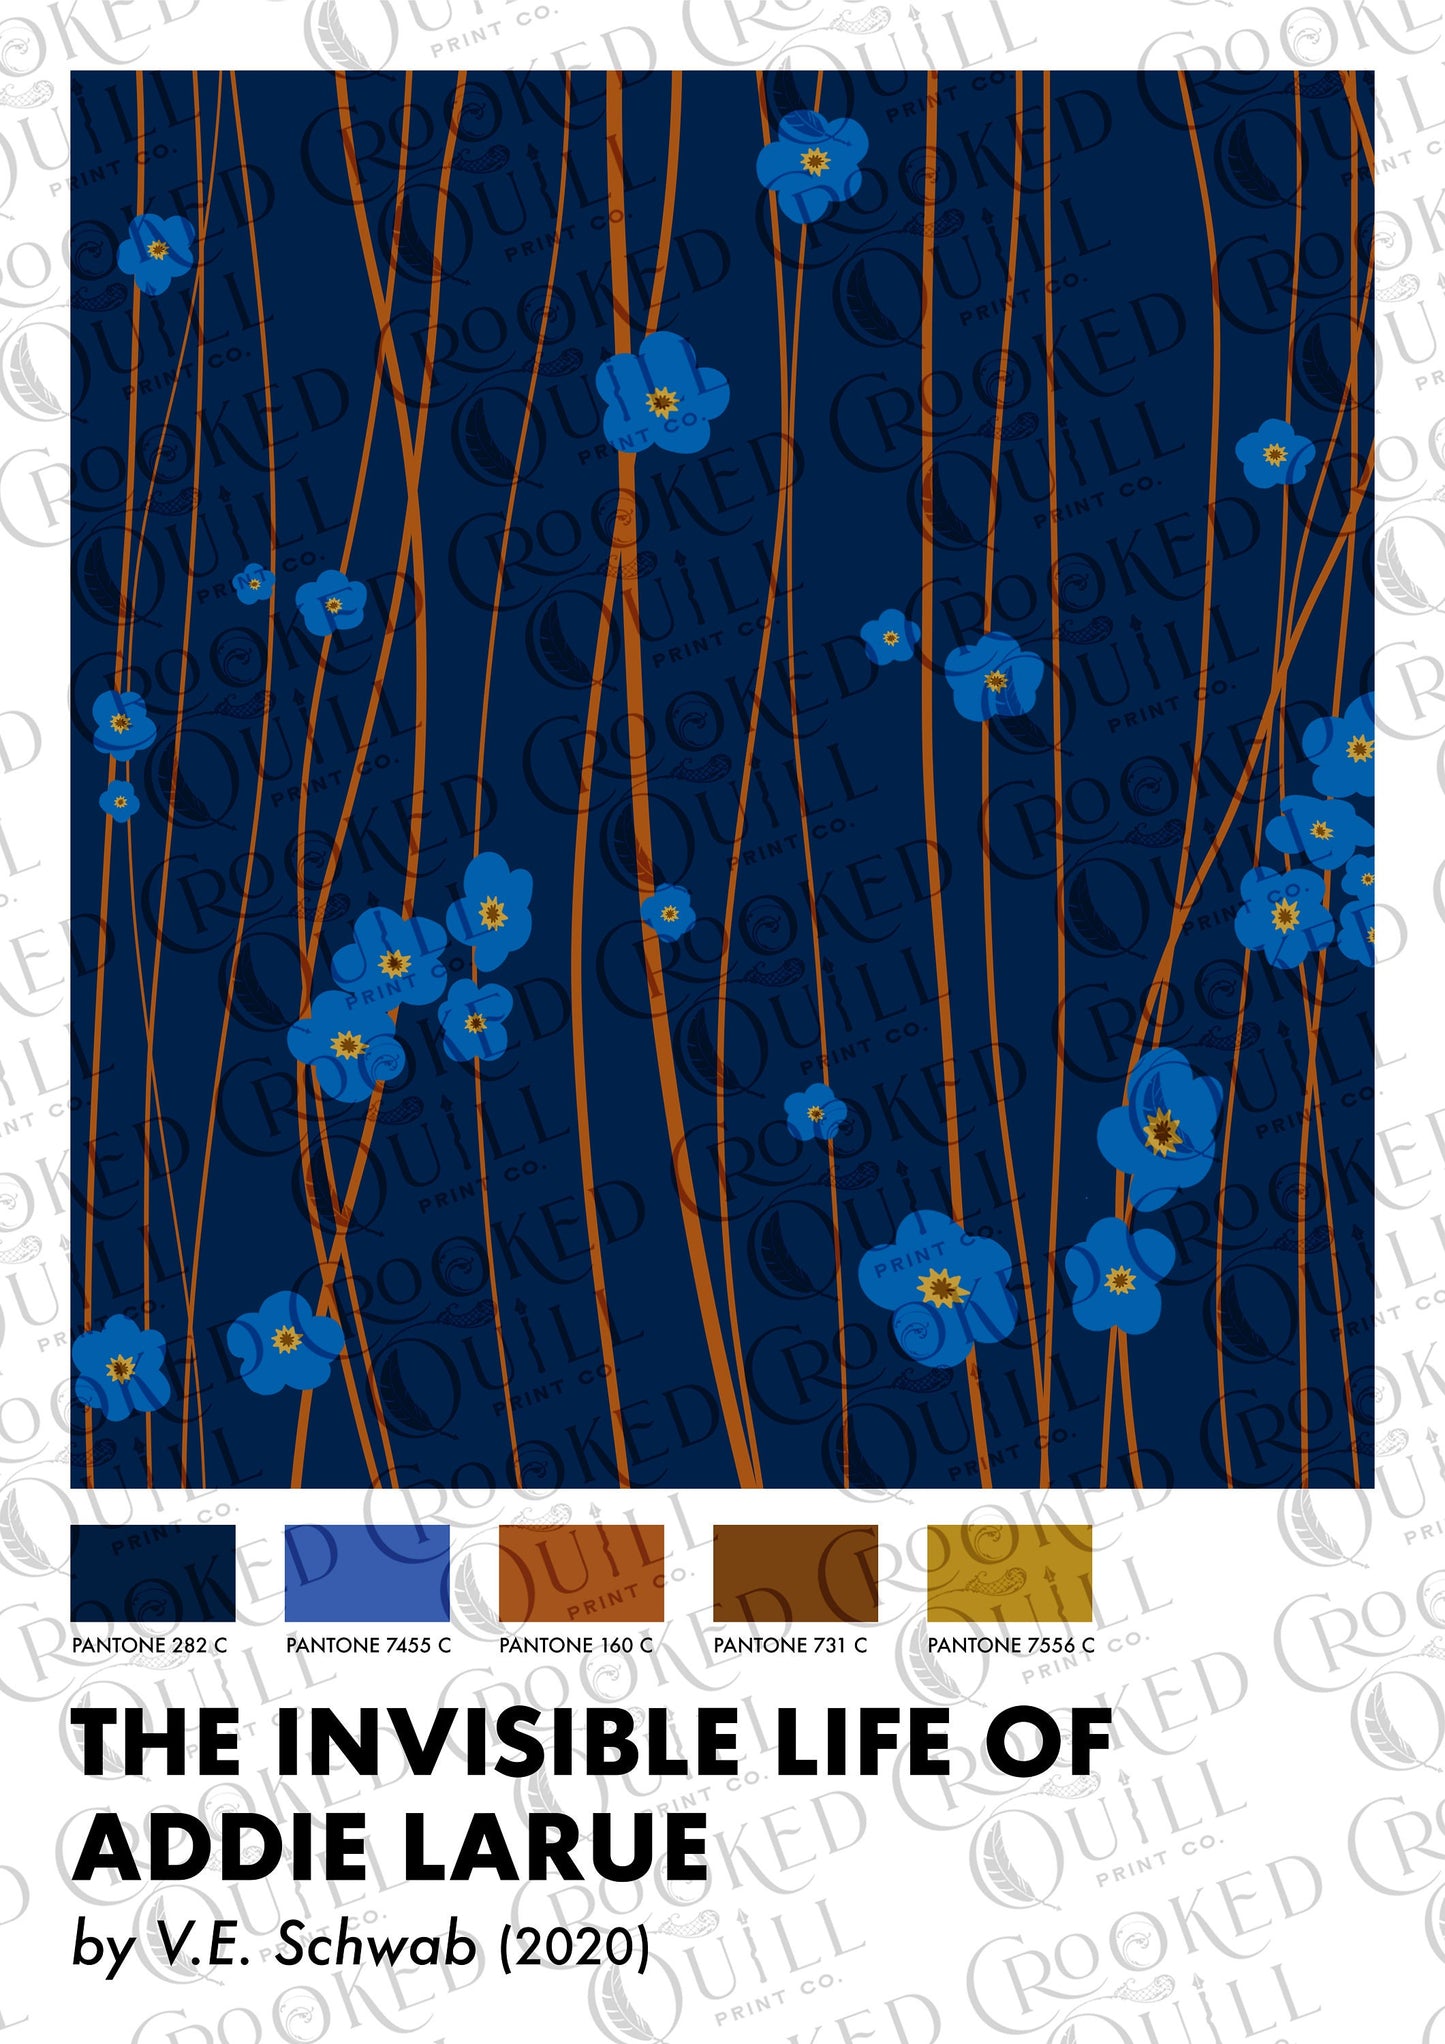 The Invisible Life of Addie LaRue Inspired Art Print - The Pantone Collection